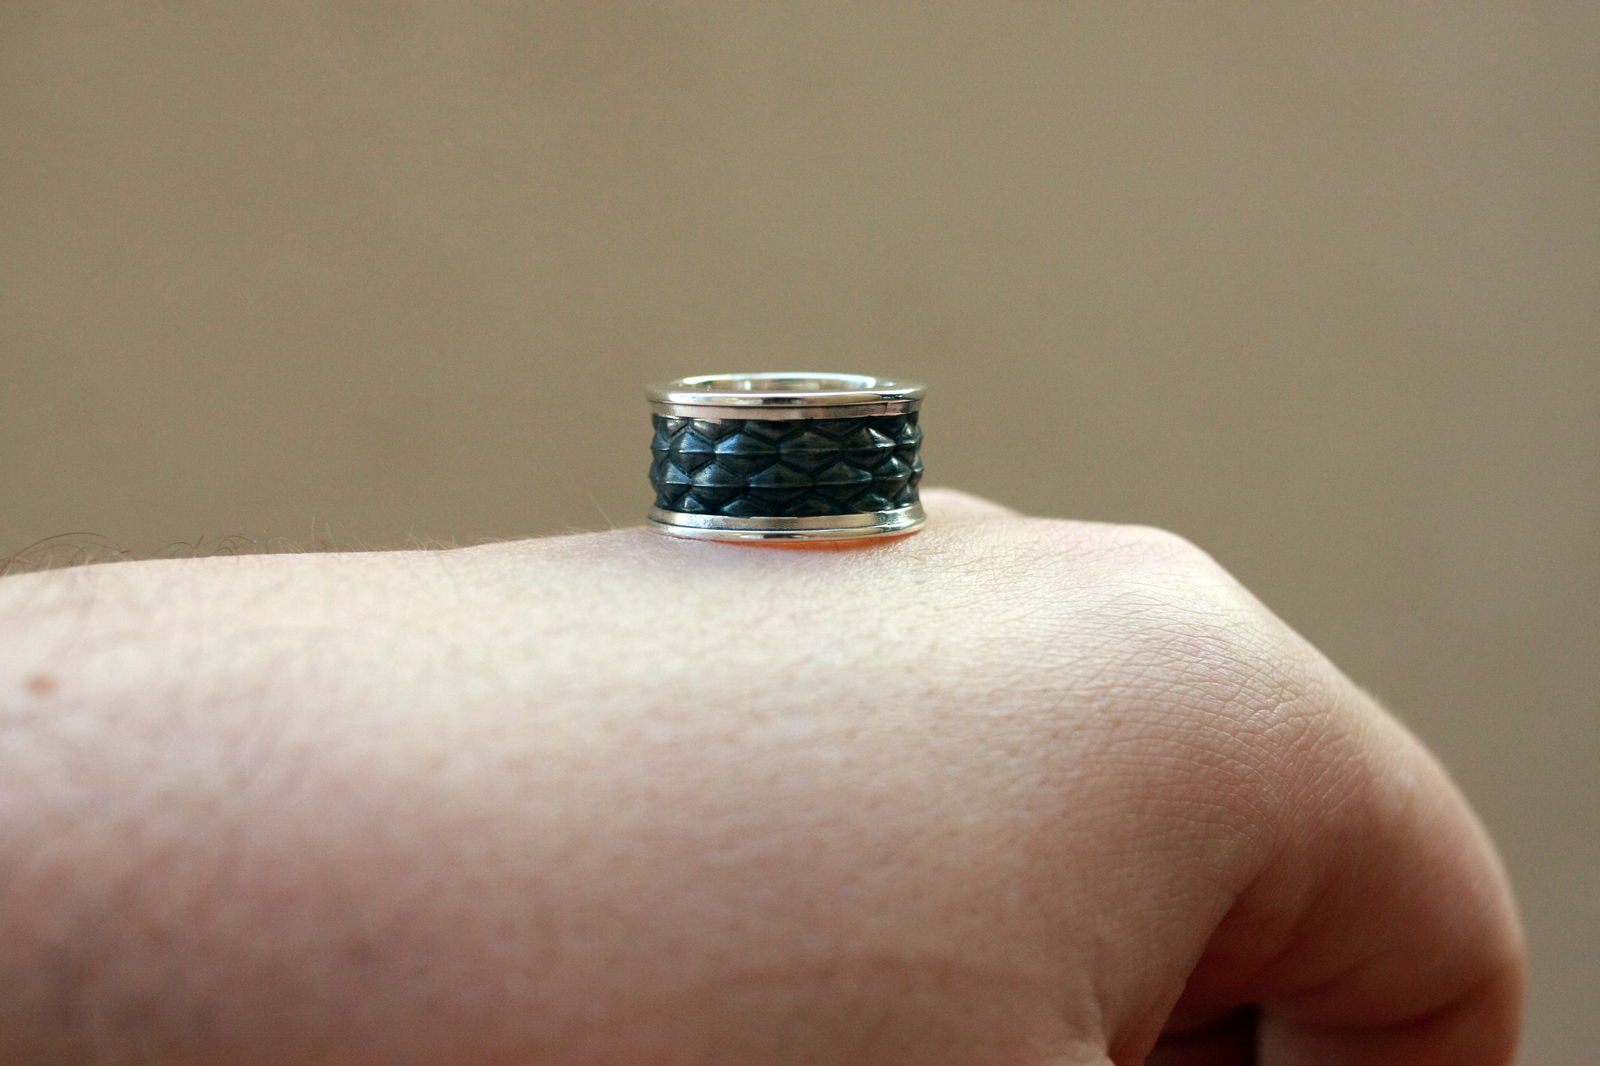 Serpent Scale Ring - My, Snake, Video, Longpost, Ring, Scales, Needlework without process